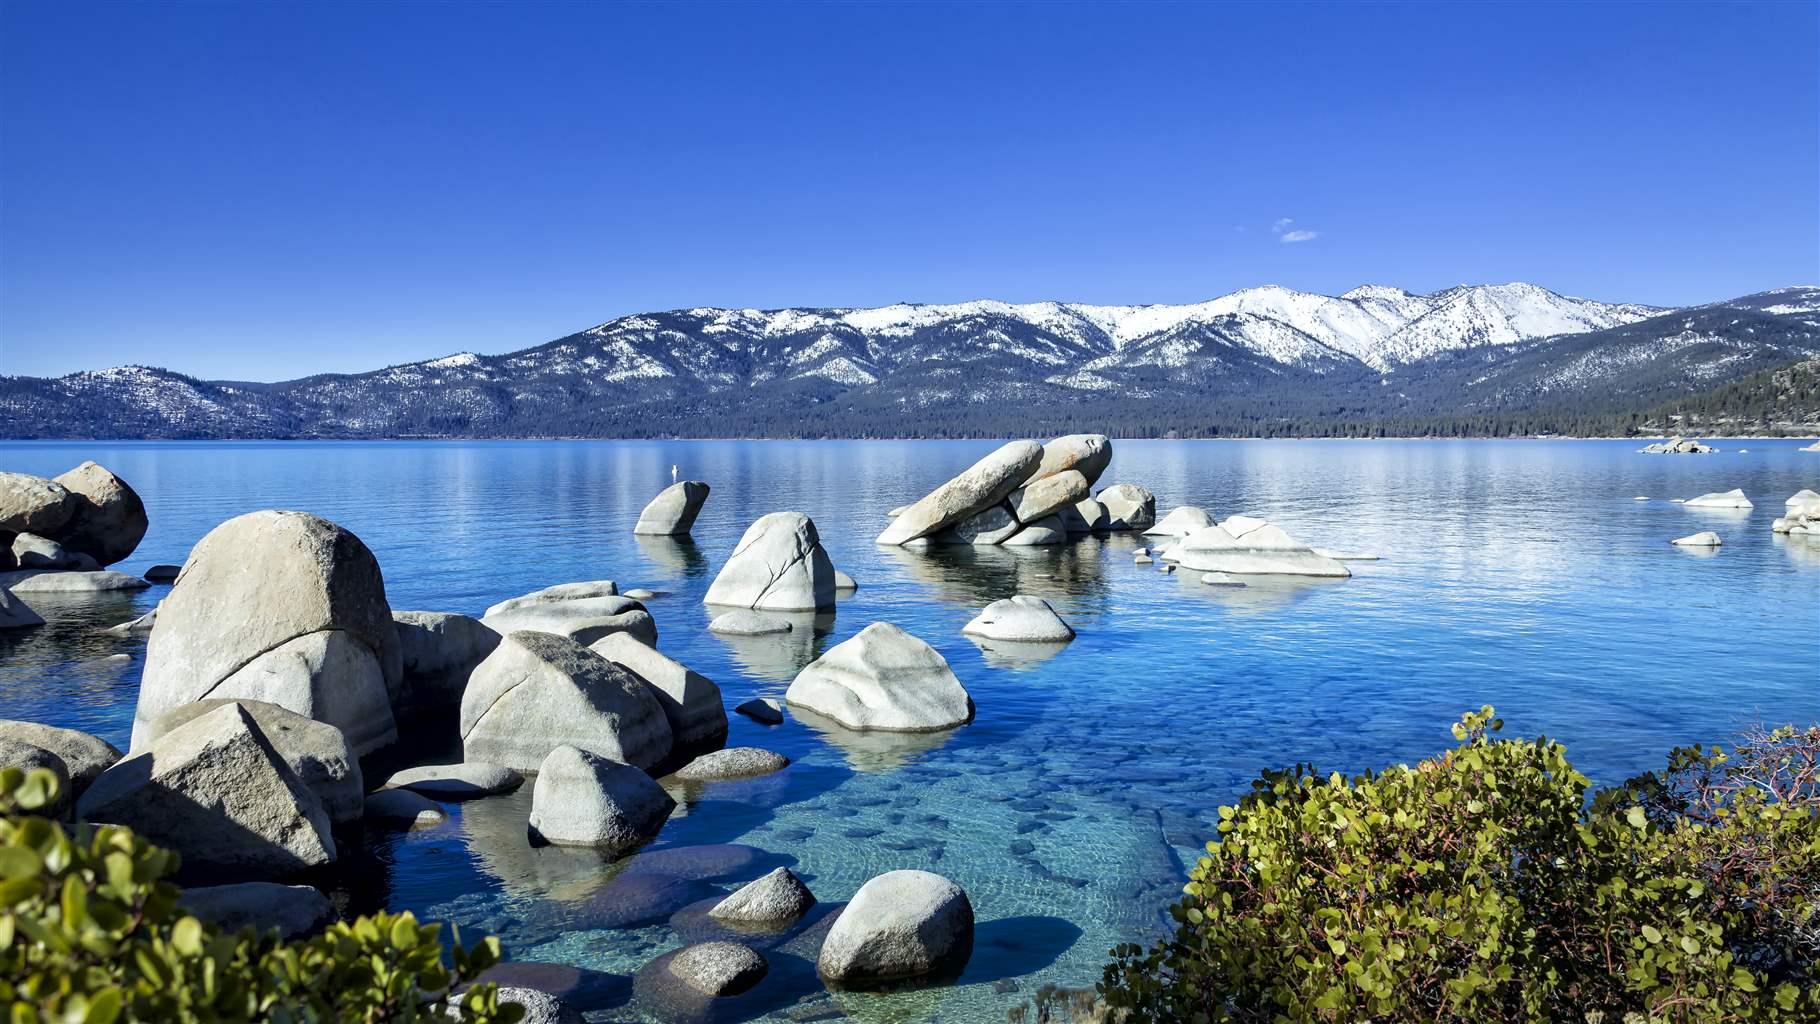 The image is of Sand Harbor, a Neveda State Park located on the Northeast shore of Lake Tahoe in the late winter with lingering snow throughout the park. This location offers some of the most beautiful crystal-clear water with interesting rock formations. The location is a favorite spot for swimming, picnicking, kayaking, boating and even scuba diving.